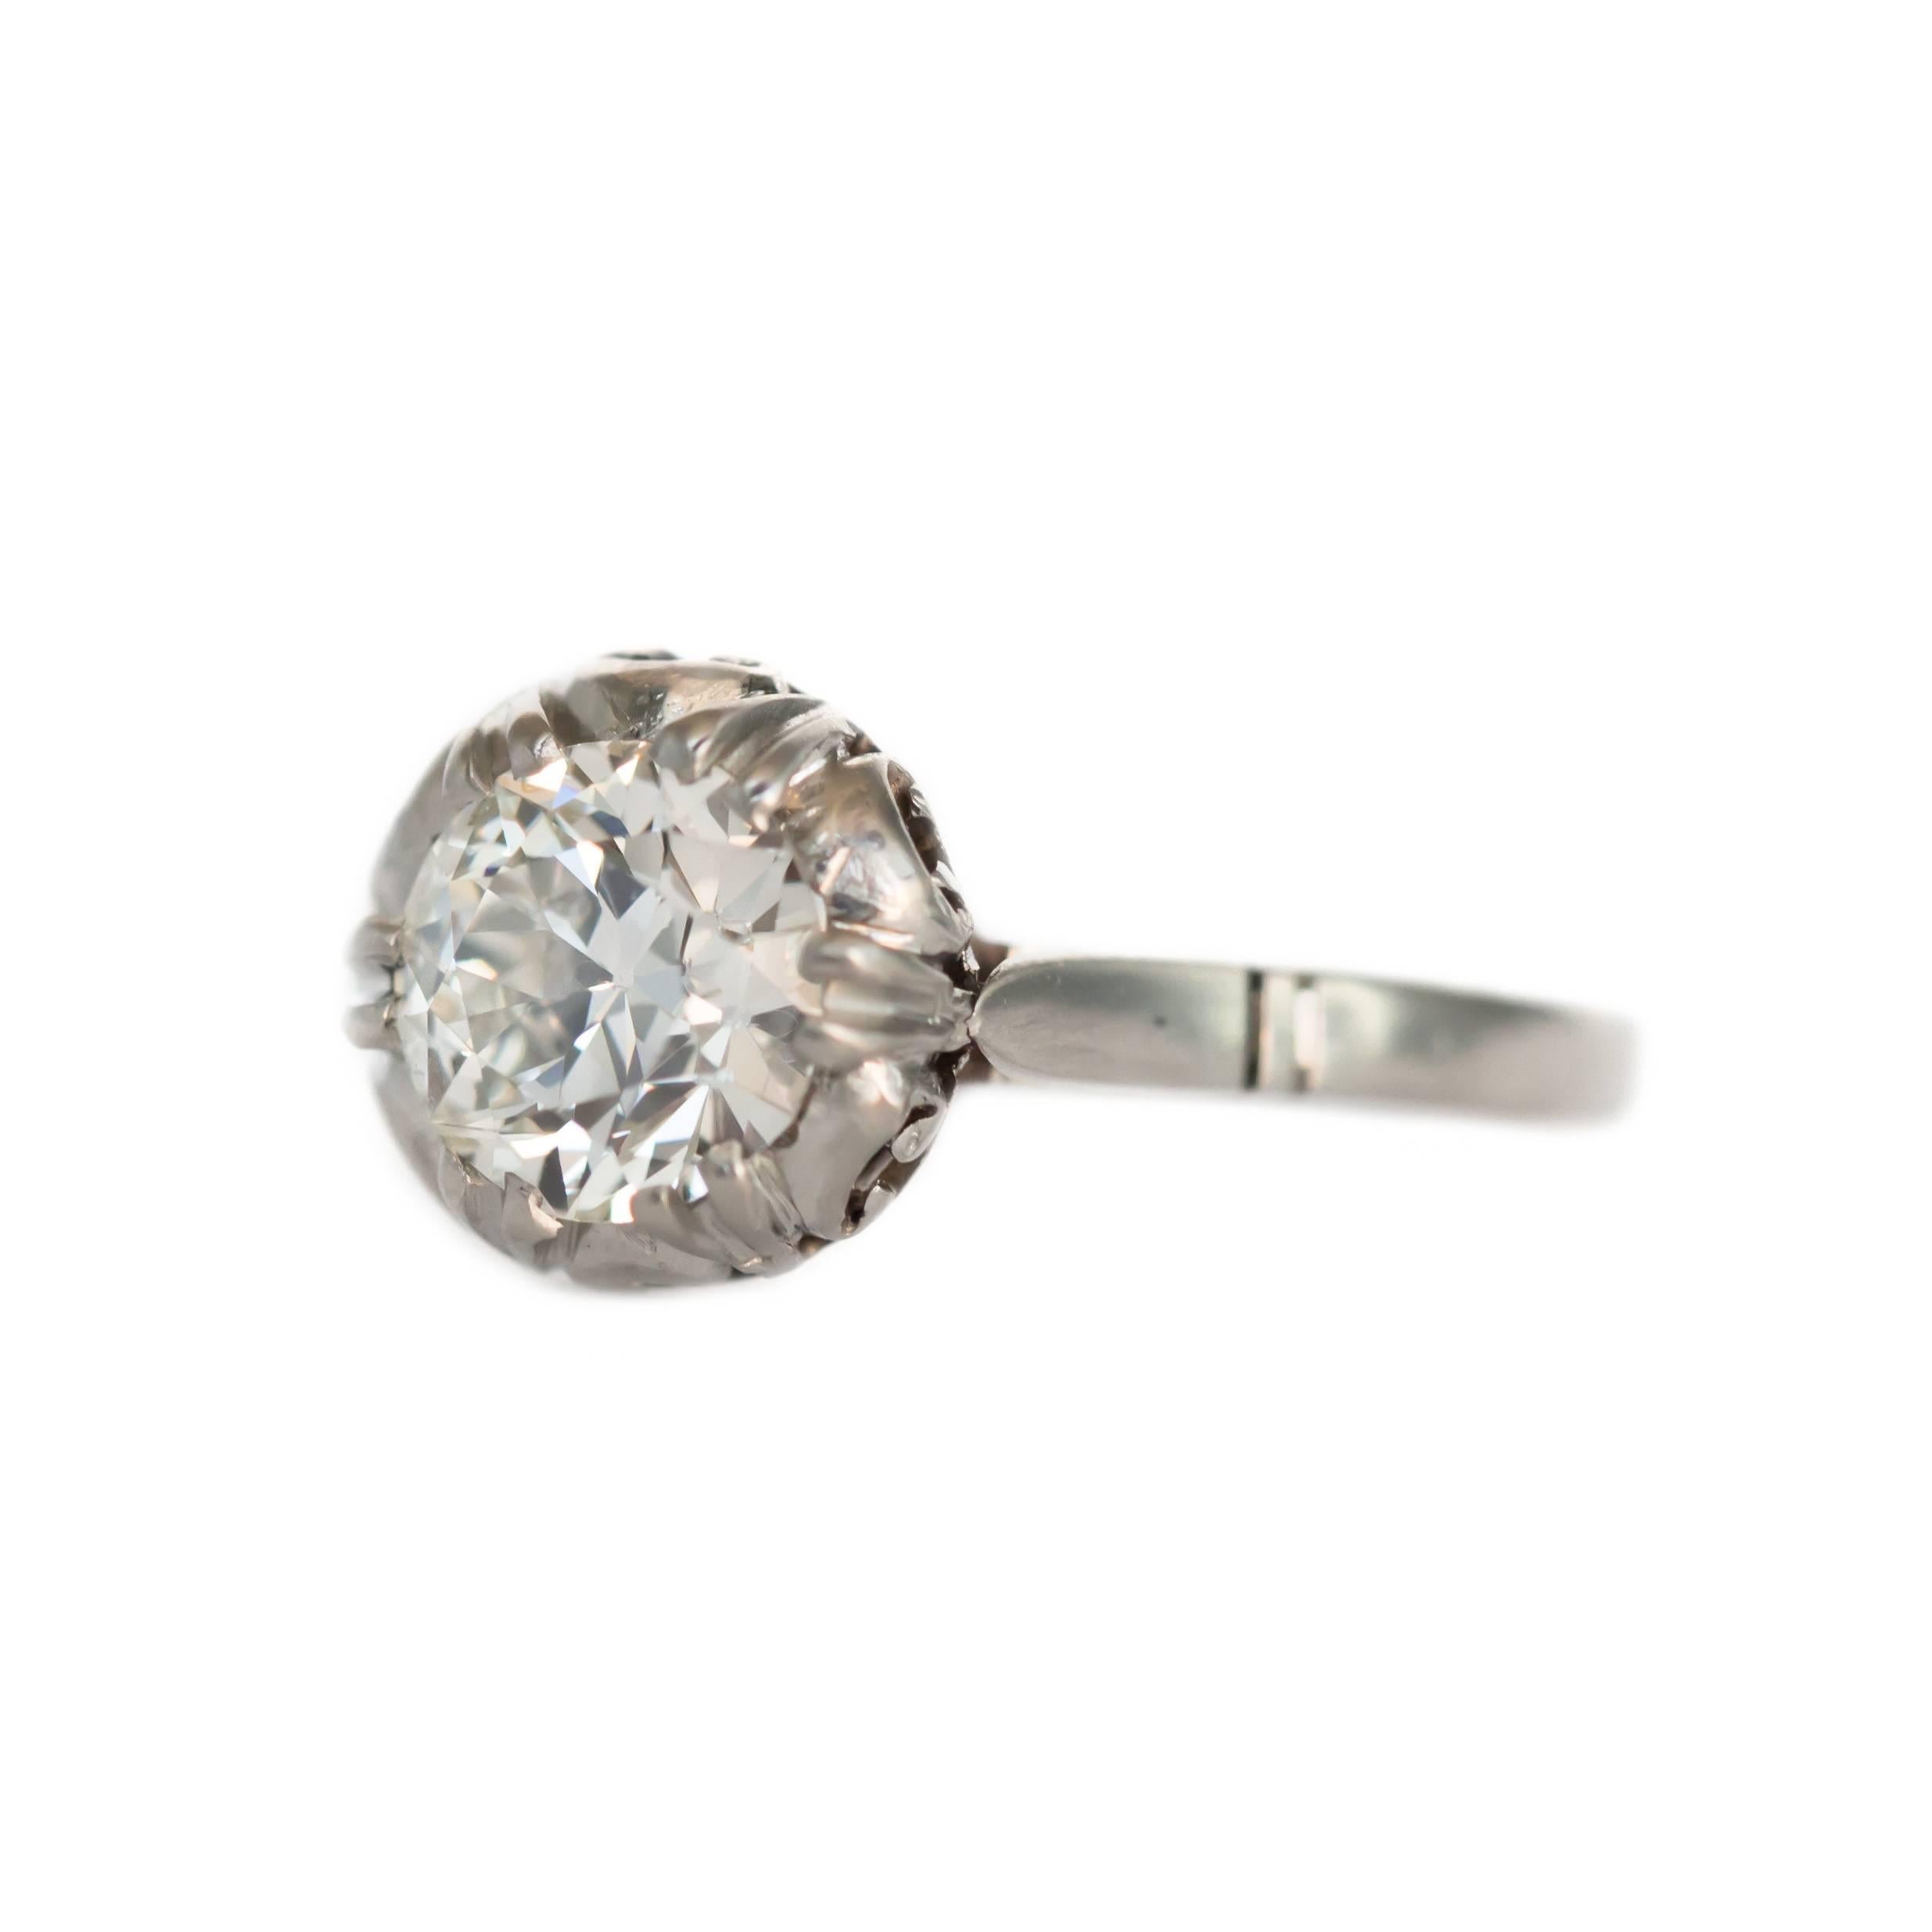 Item Details: 
Ring Size: 5.25
Metal Type: Platinum
Weight: 2.8 grams

Center Diamond Details:
GIA CERTIFIED Center Diamond - Certificate # [ 2185880098 ] 
Shape: Circular Brilliant
Carat Weight: 0.96 carat
Color: J
Clarity: SI1

Finger to Top of